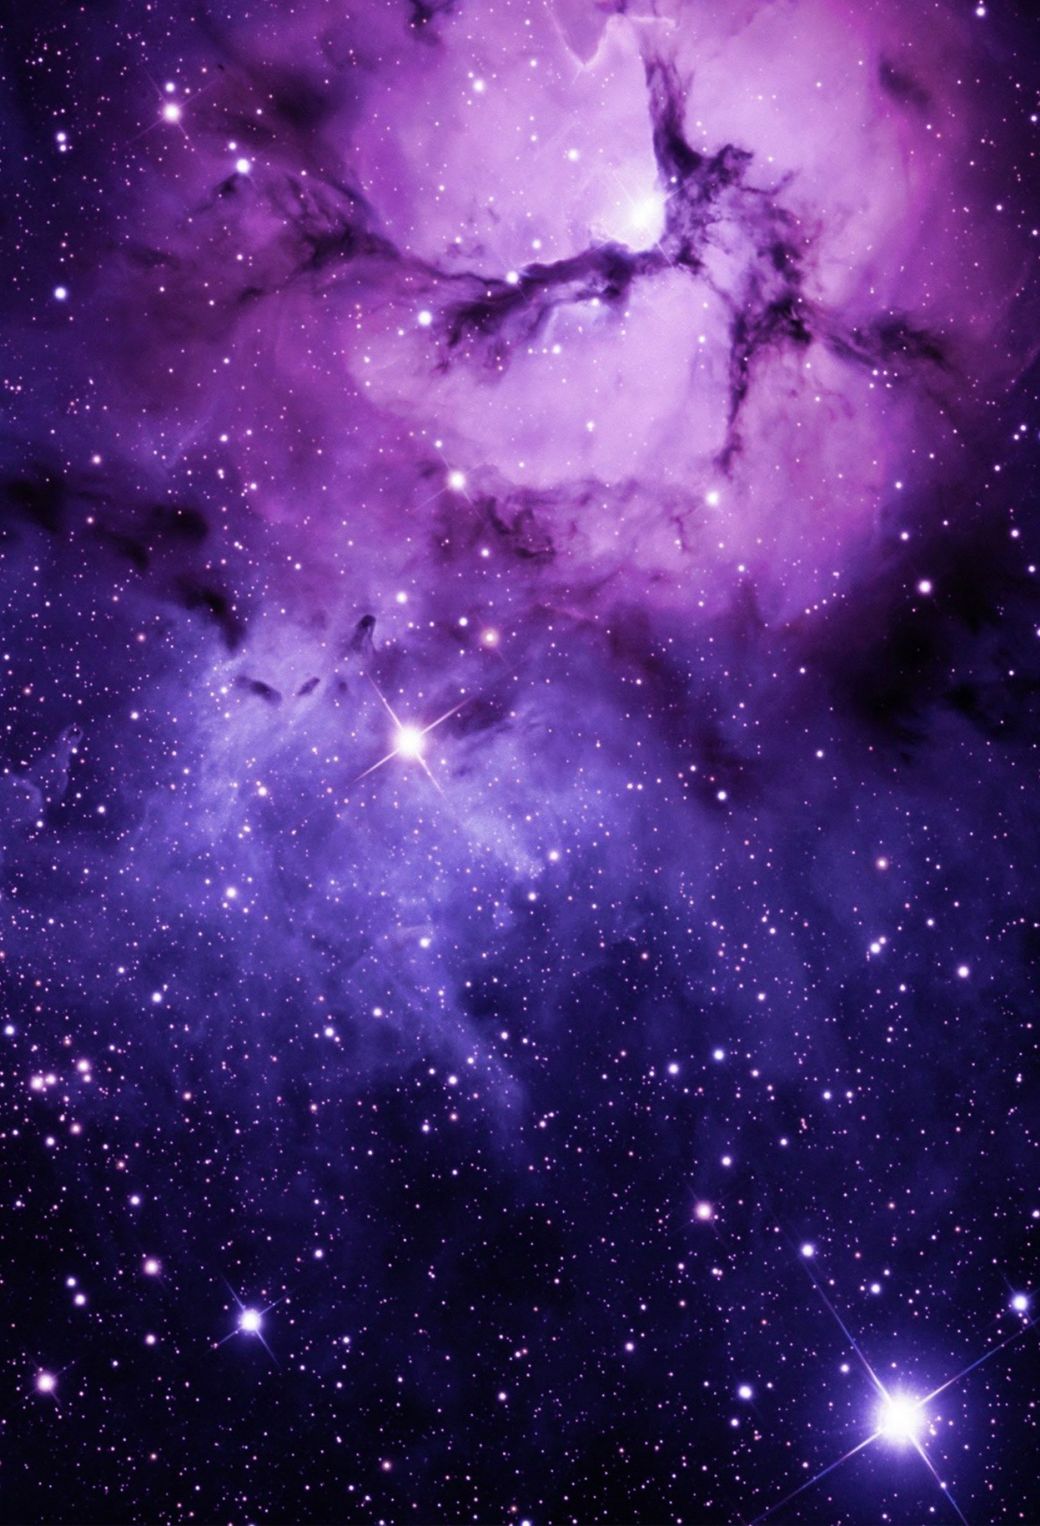 Download wallpaper 2048x1152 astronomy, galaxy, clouds, space, dark, starry  sky, dual wide 2048x1152 hd background, 3499